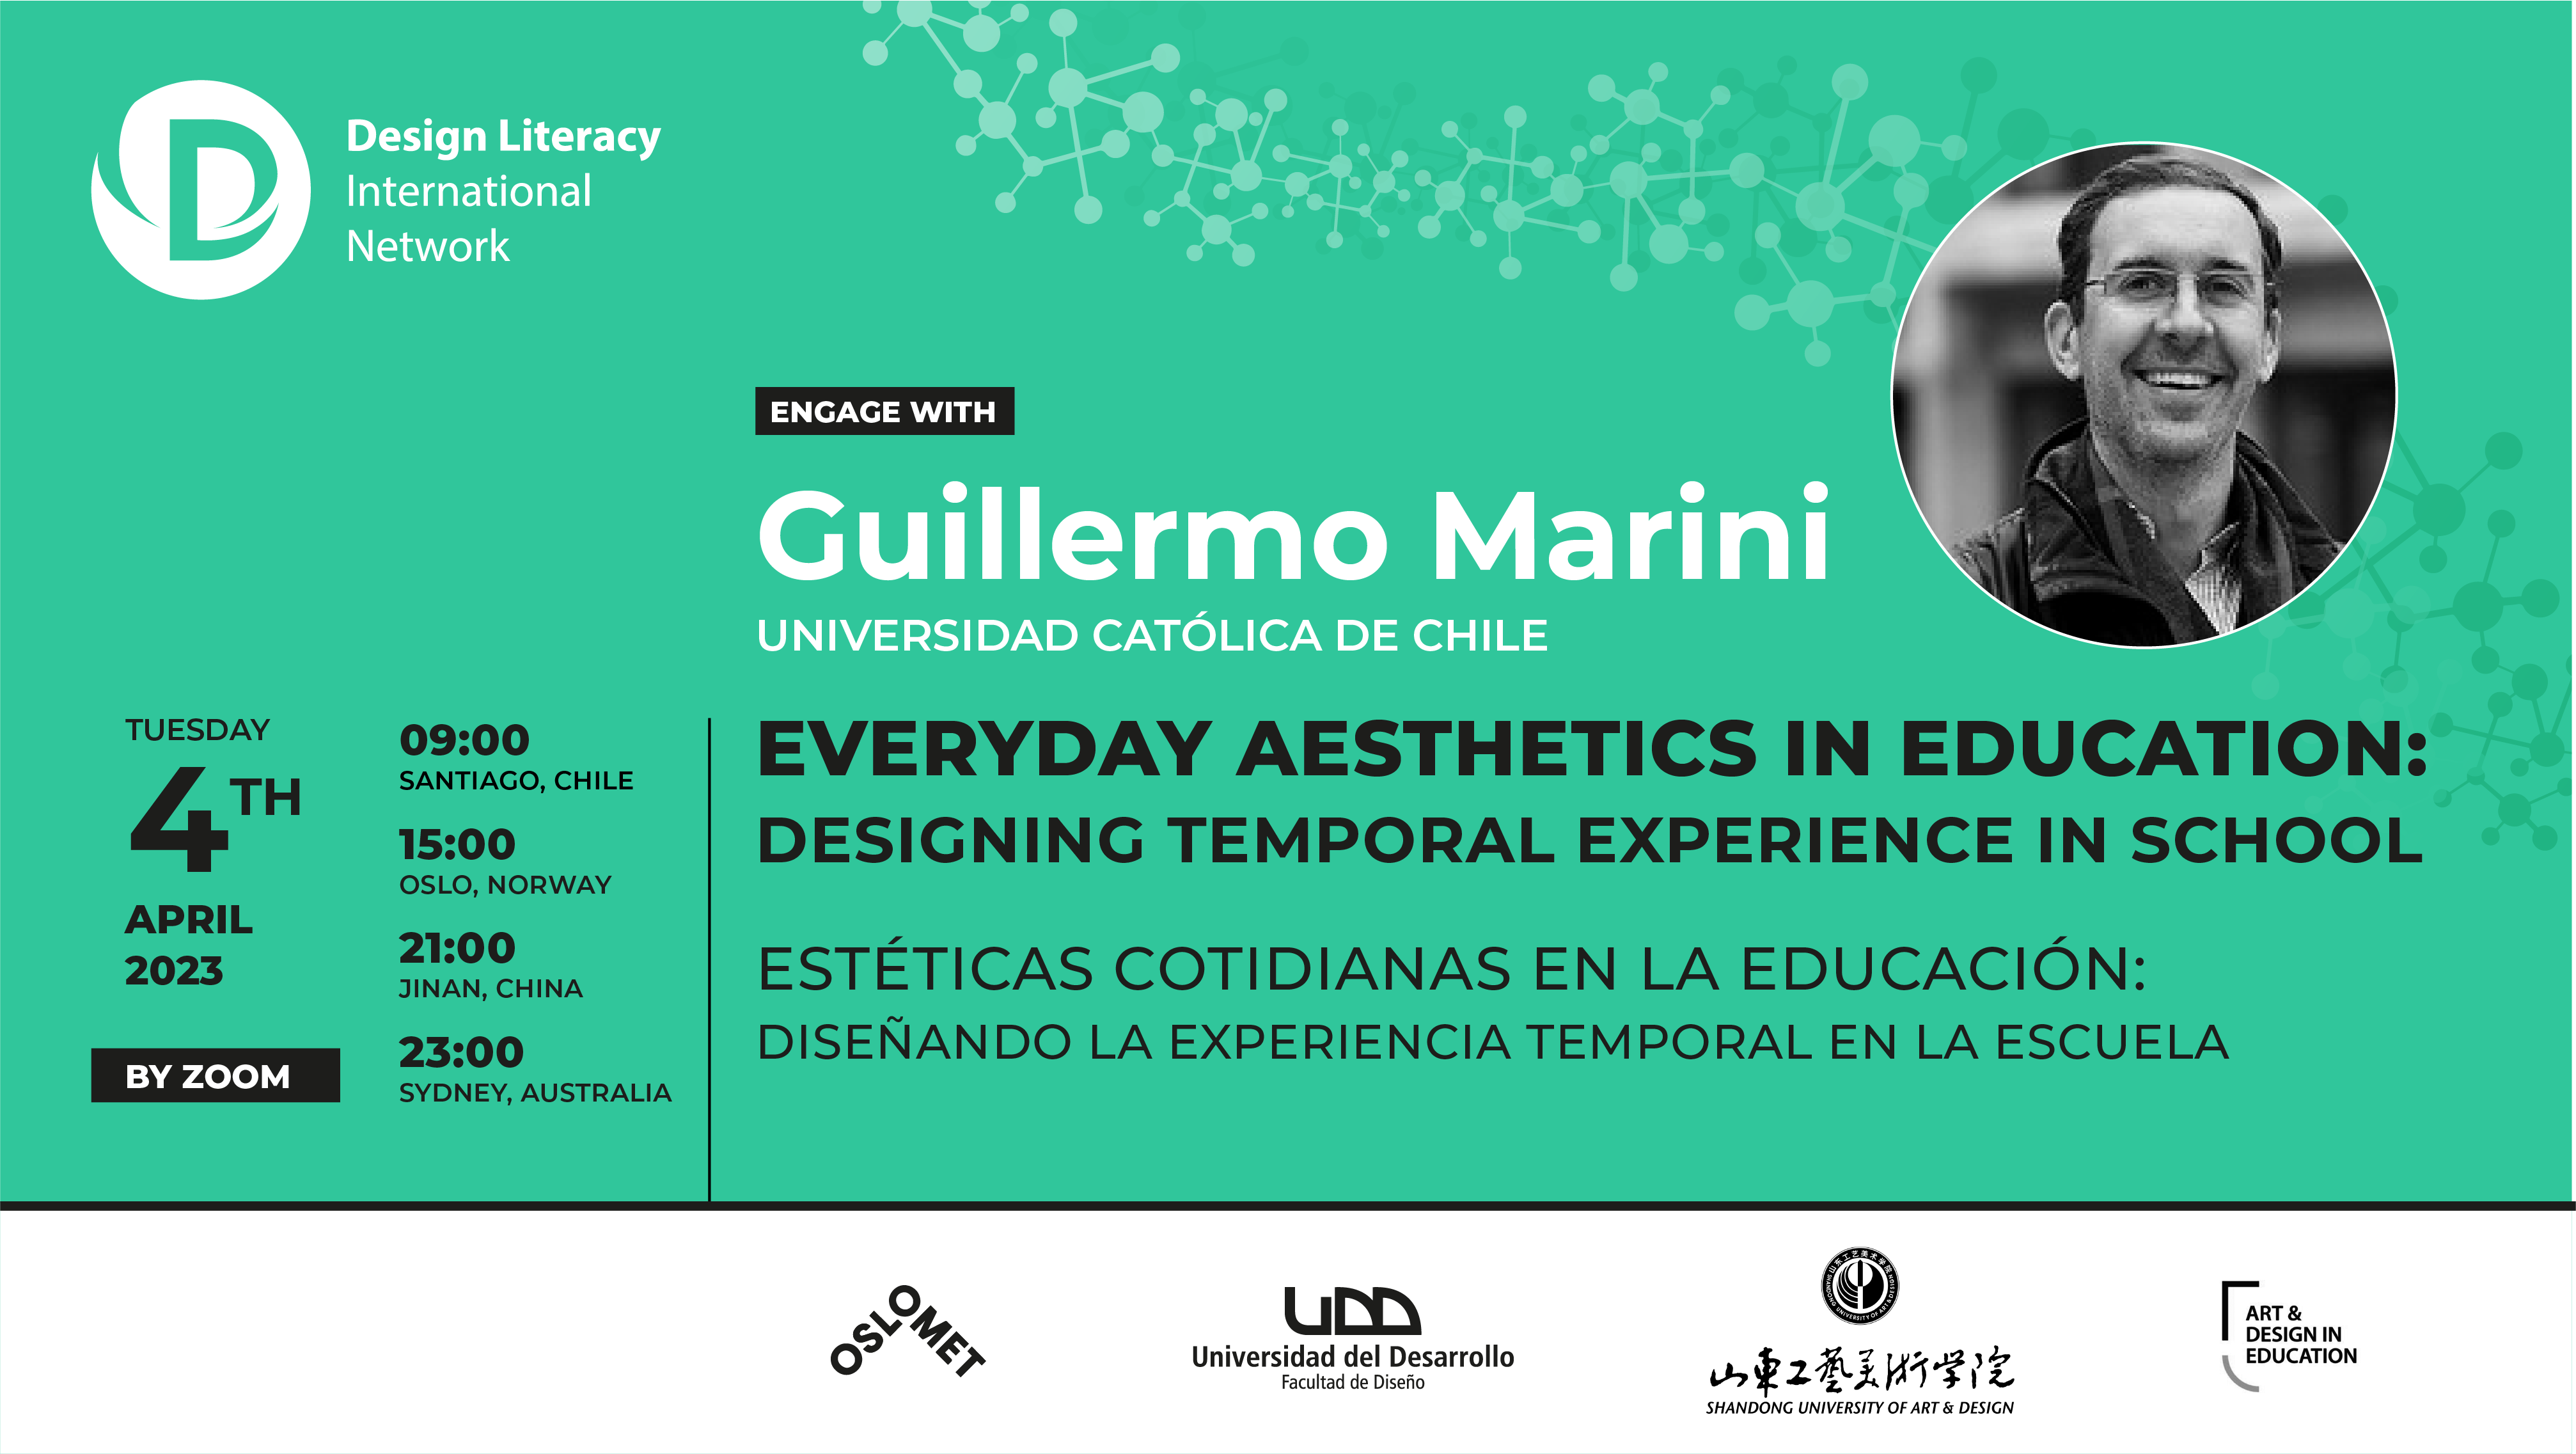 Guillermo Marini | Everyday Aesthetics in Education: Designing Temporal Experience in School